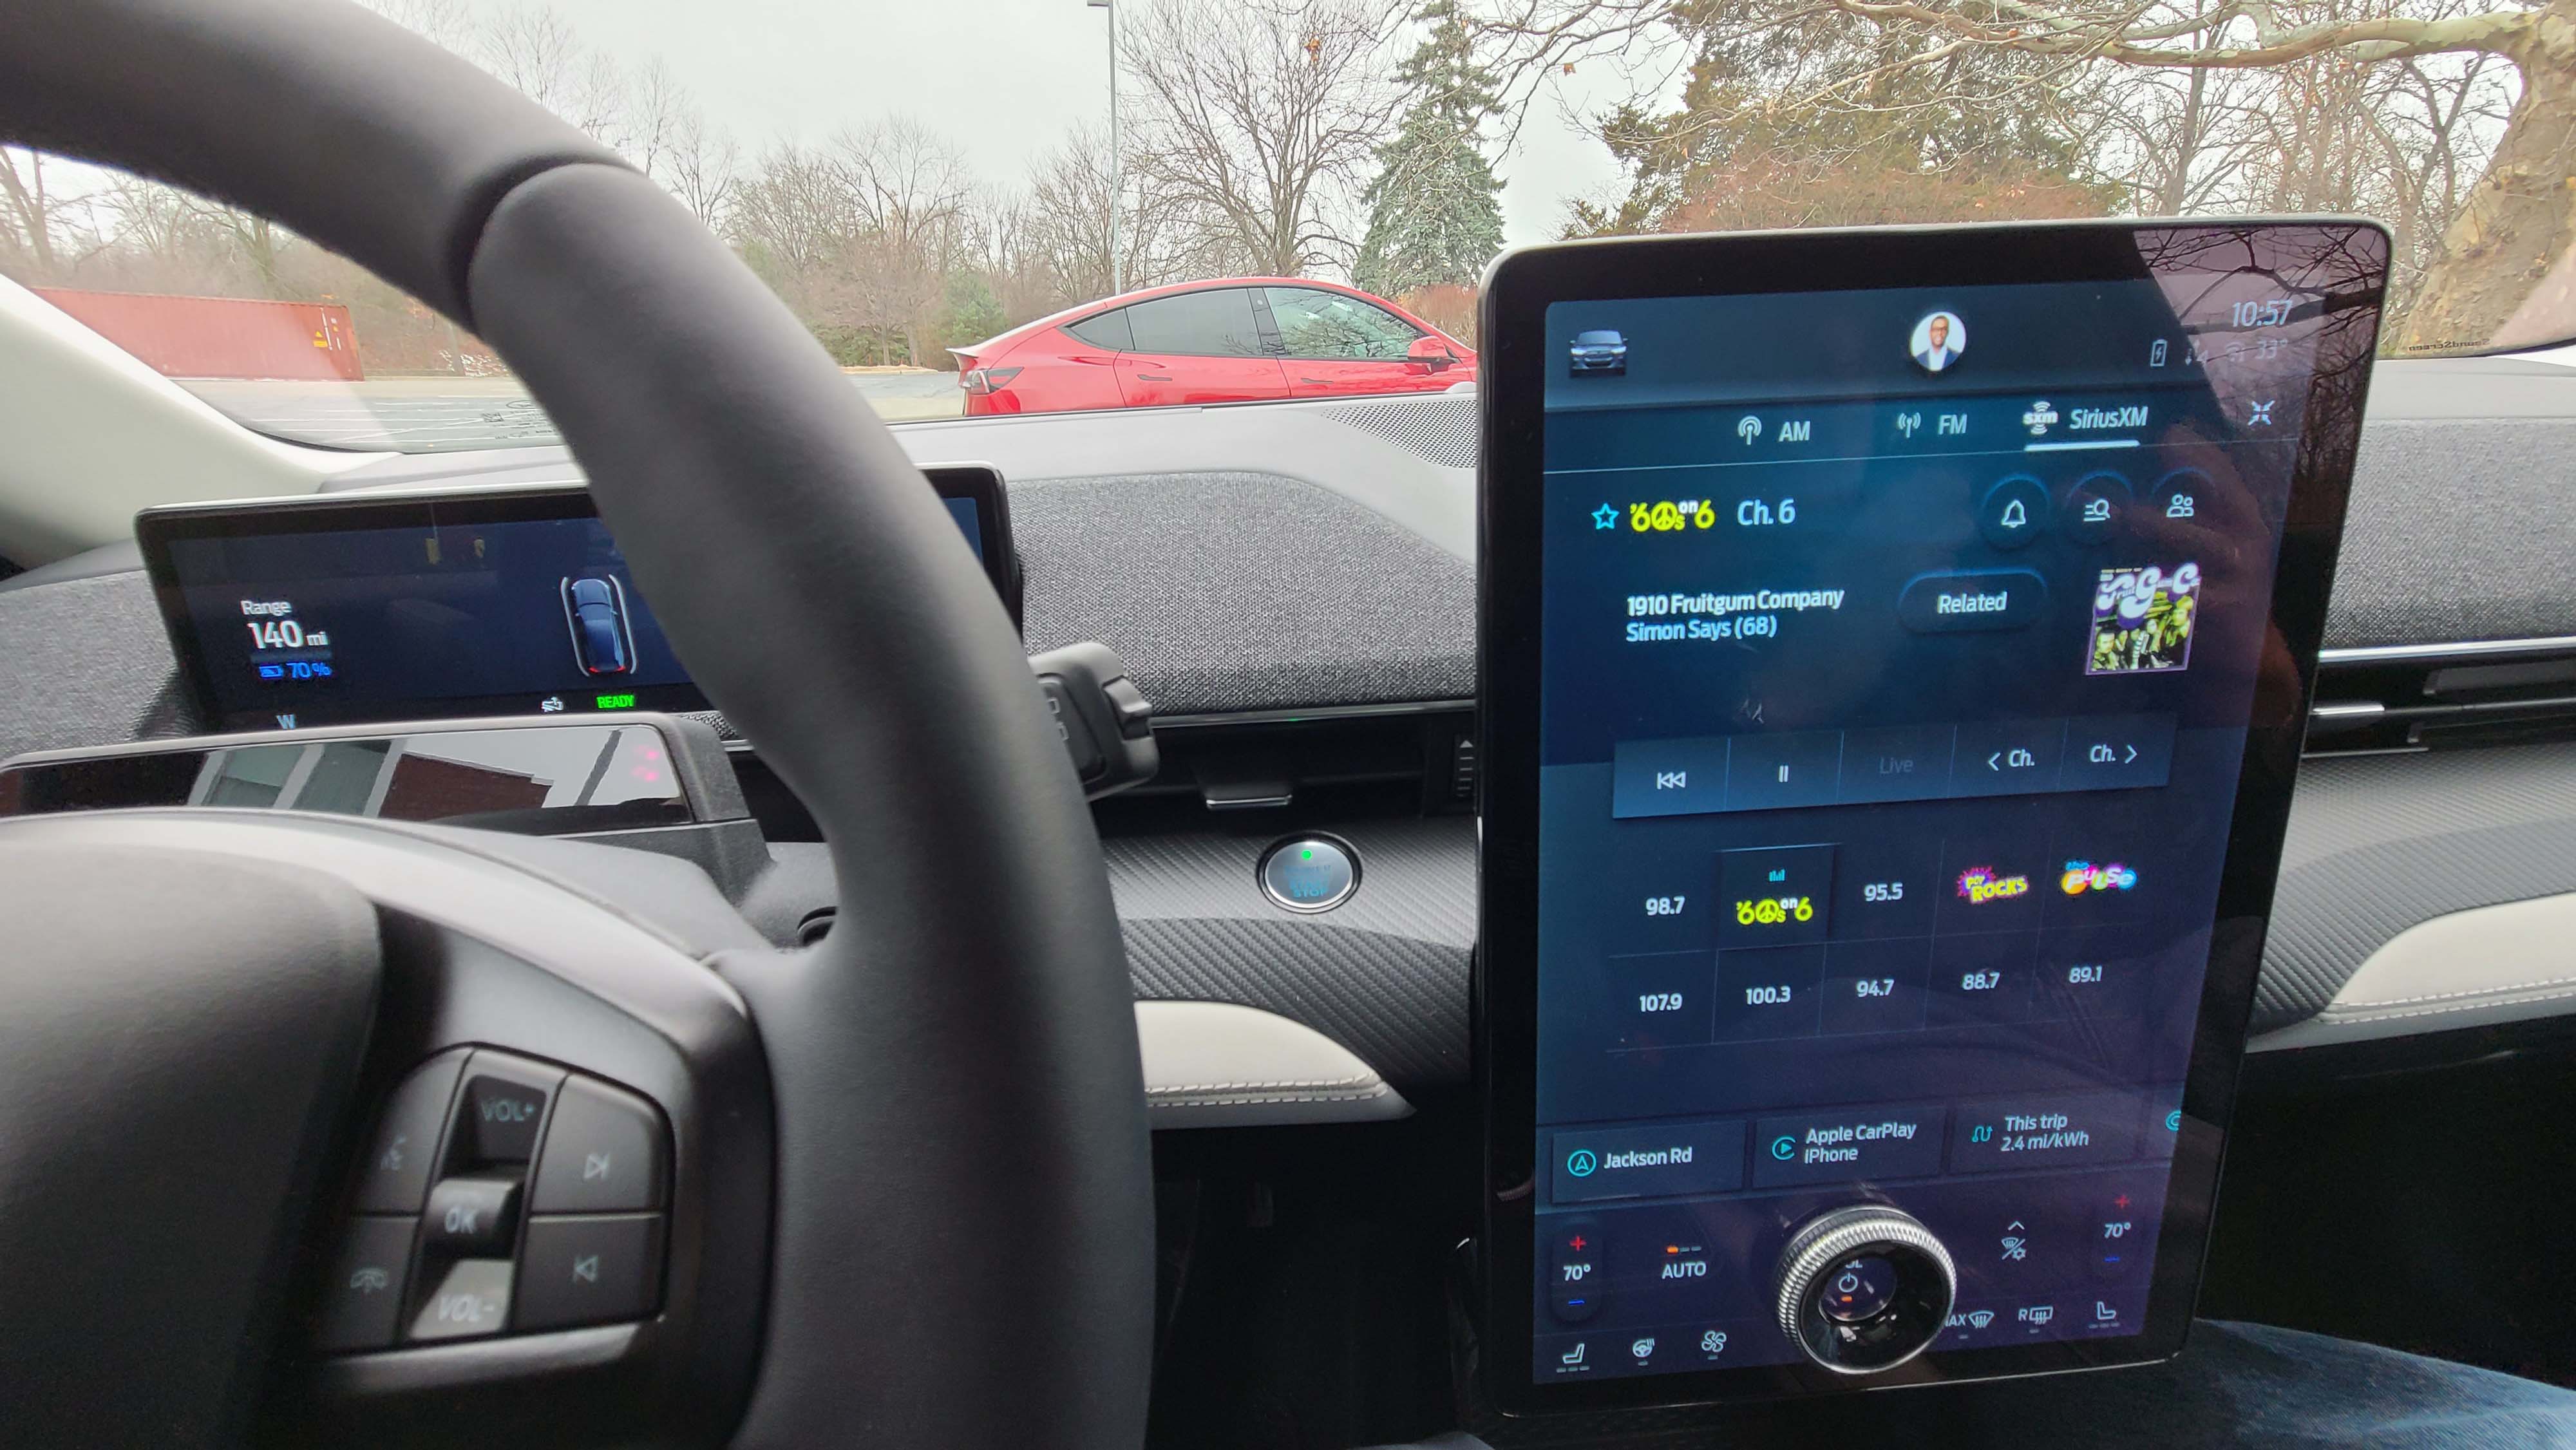 Apple CarPlay and Sirius XM. The 2021 Ford Mustang Mach-E offers Sirius XM and smartphone apps like Apple CarPlay unlike Tesla.